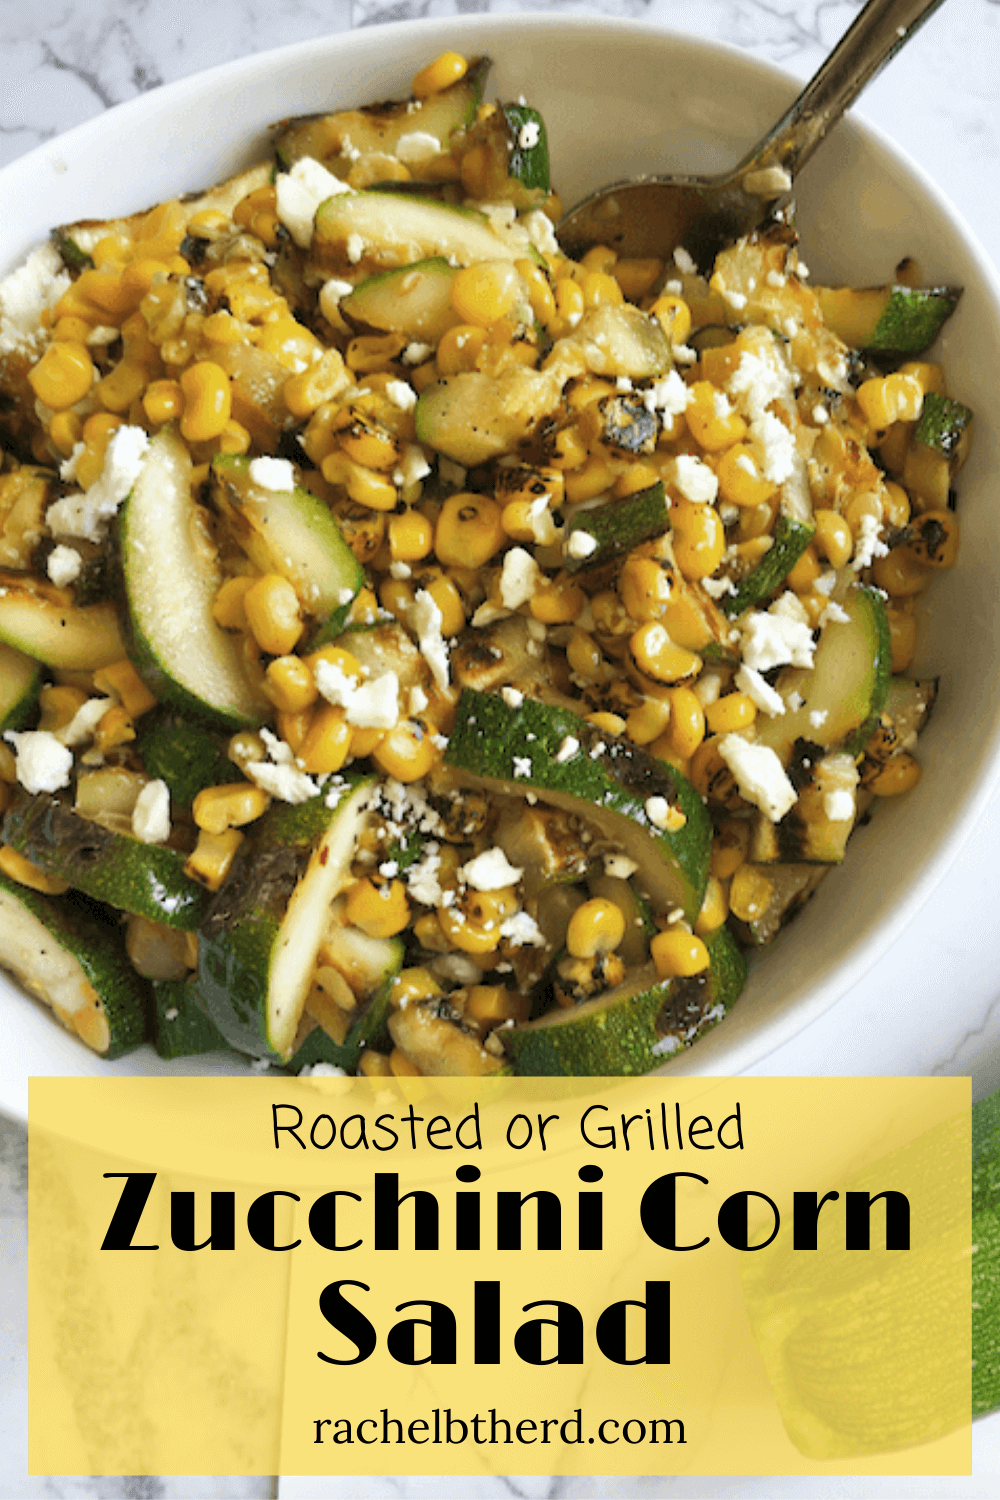 Zucchini Corn Salad in a bowl- Roasted or Grilled